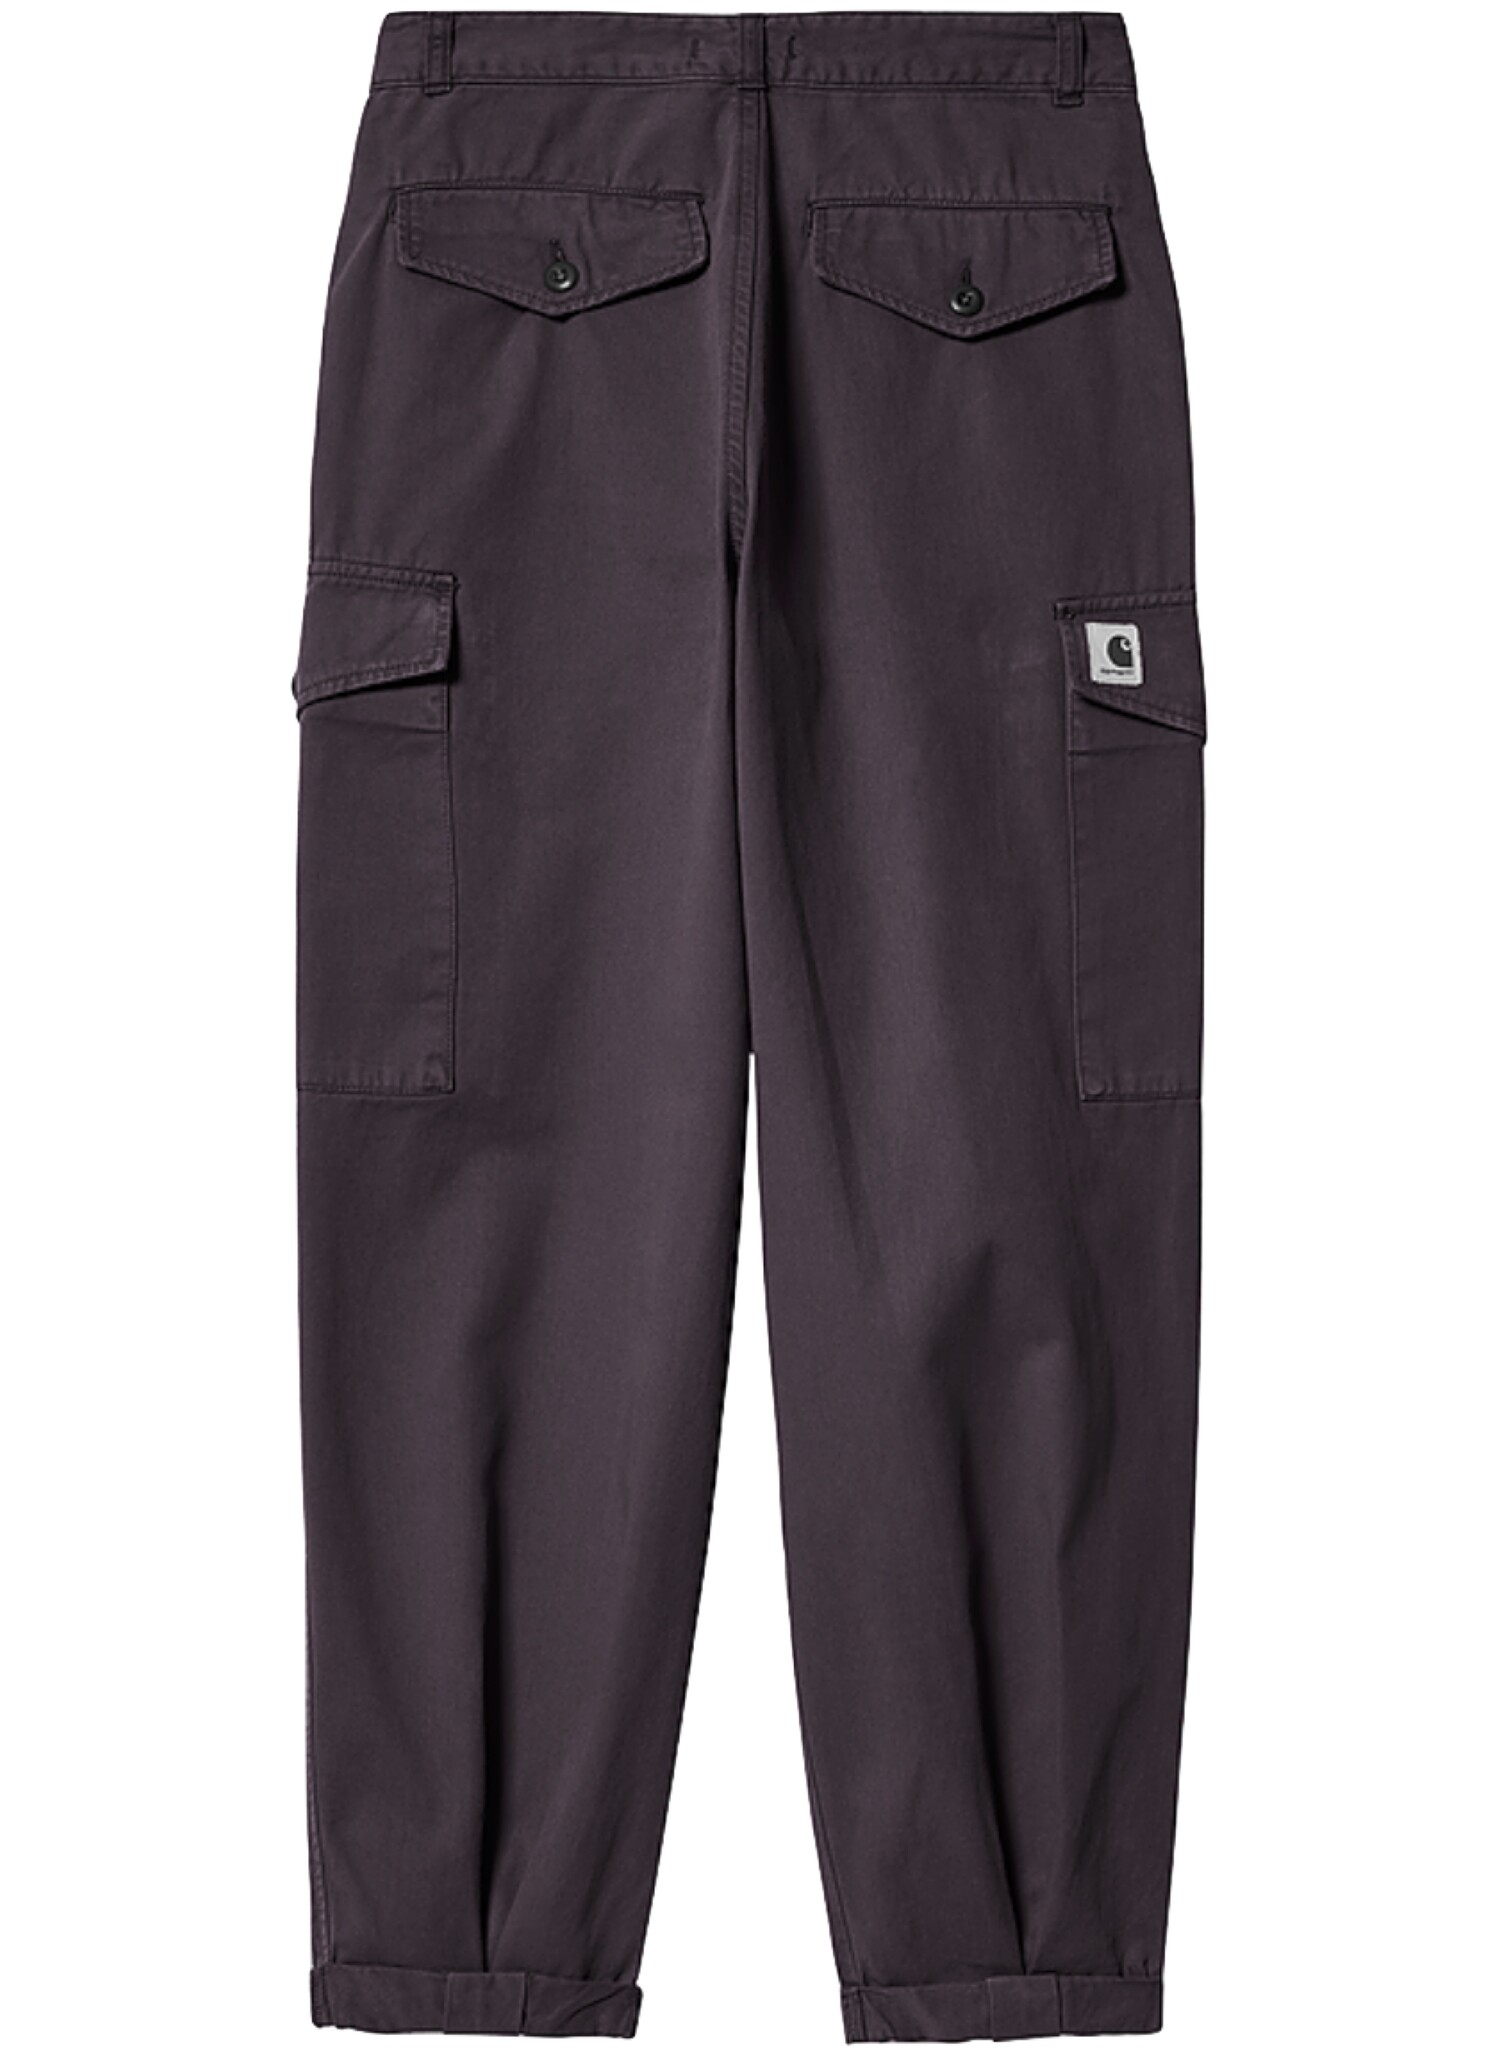 Carhartt WIP COLLINS PANT - Cargo trousers - black 